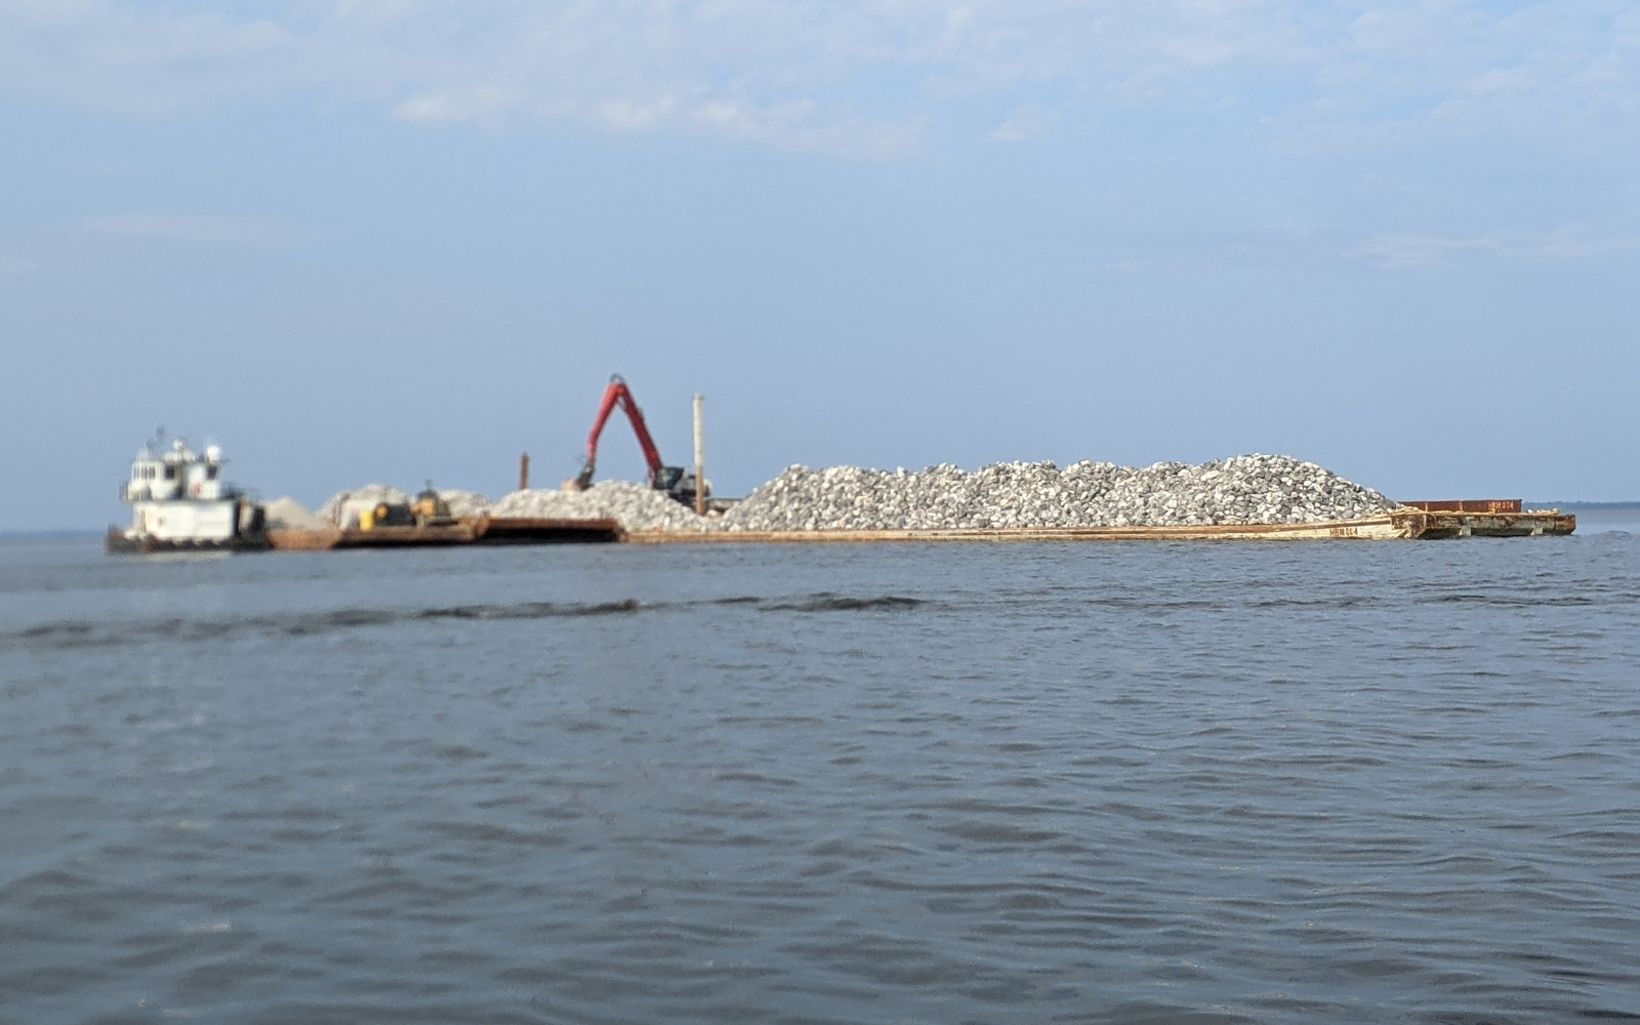 Barge containing limestone rock with an excavator in the bay.